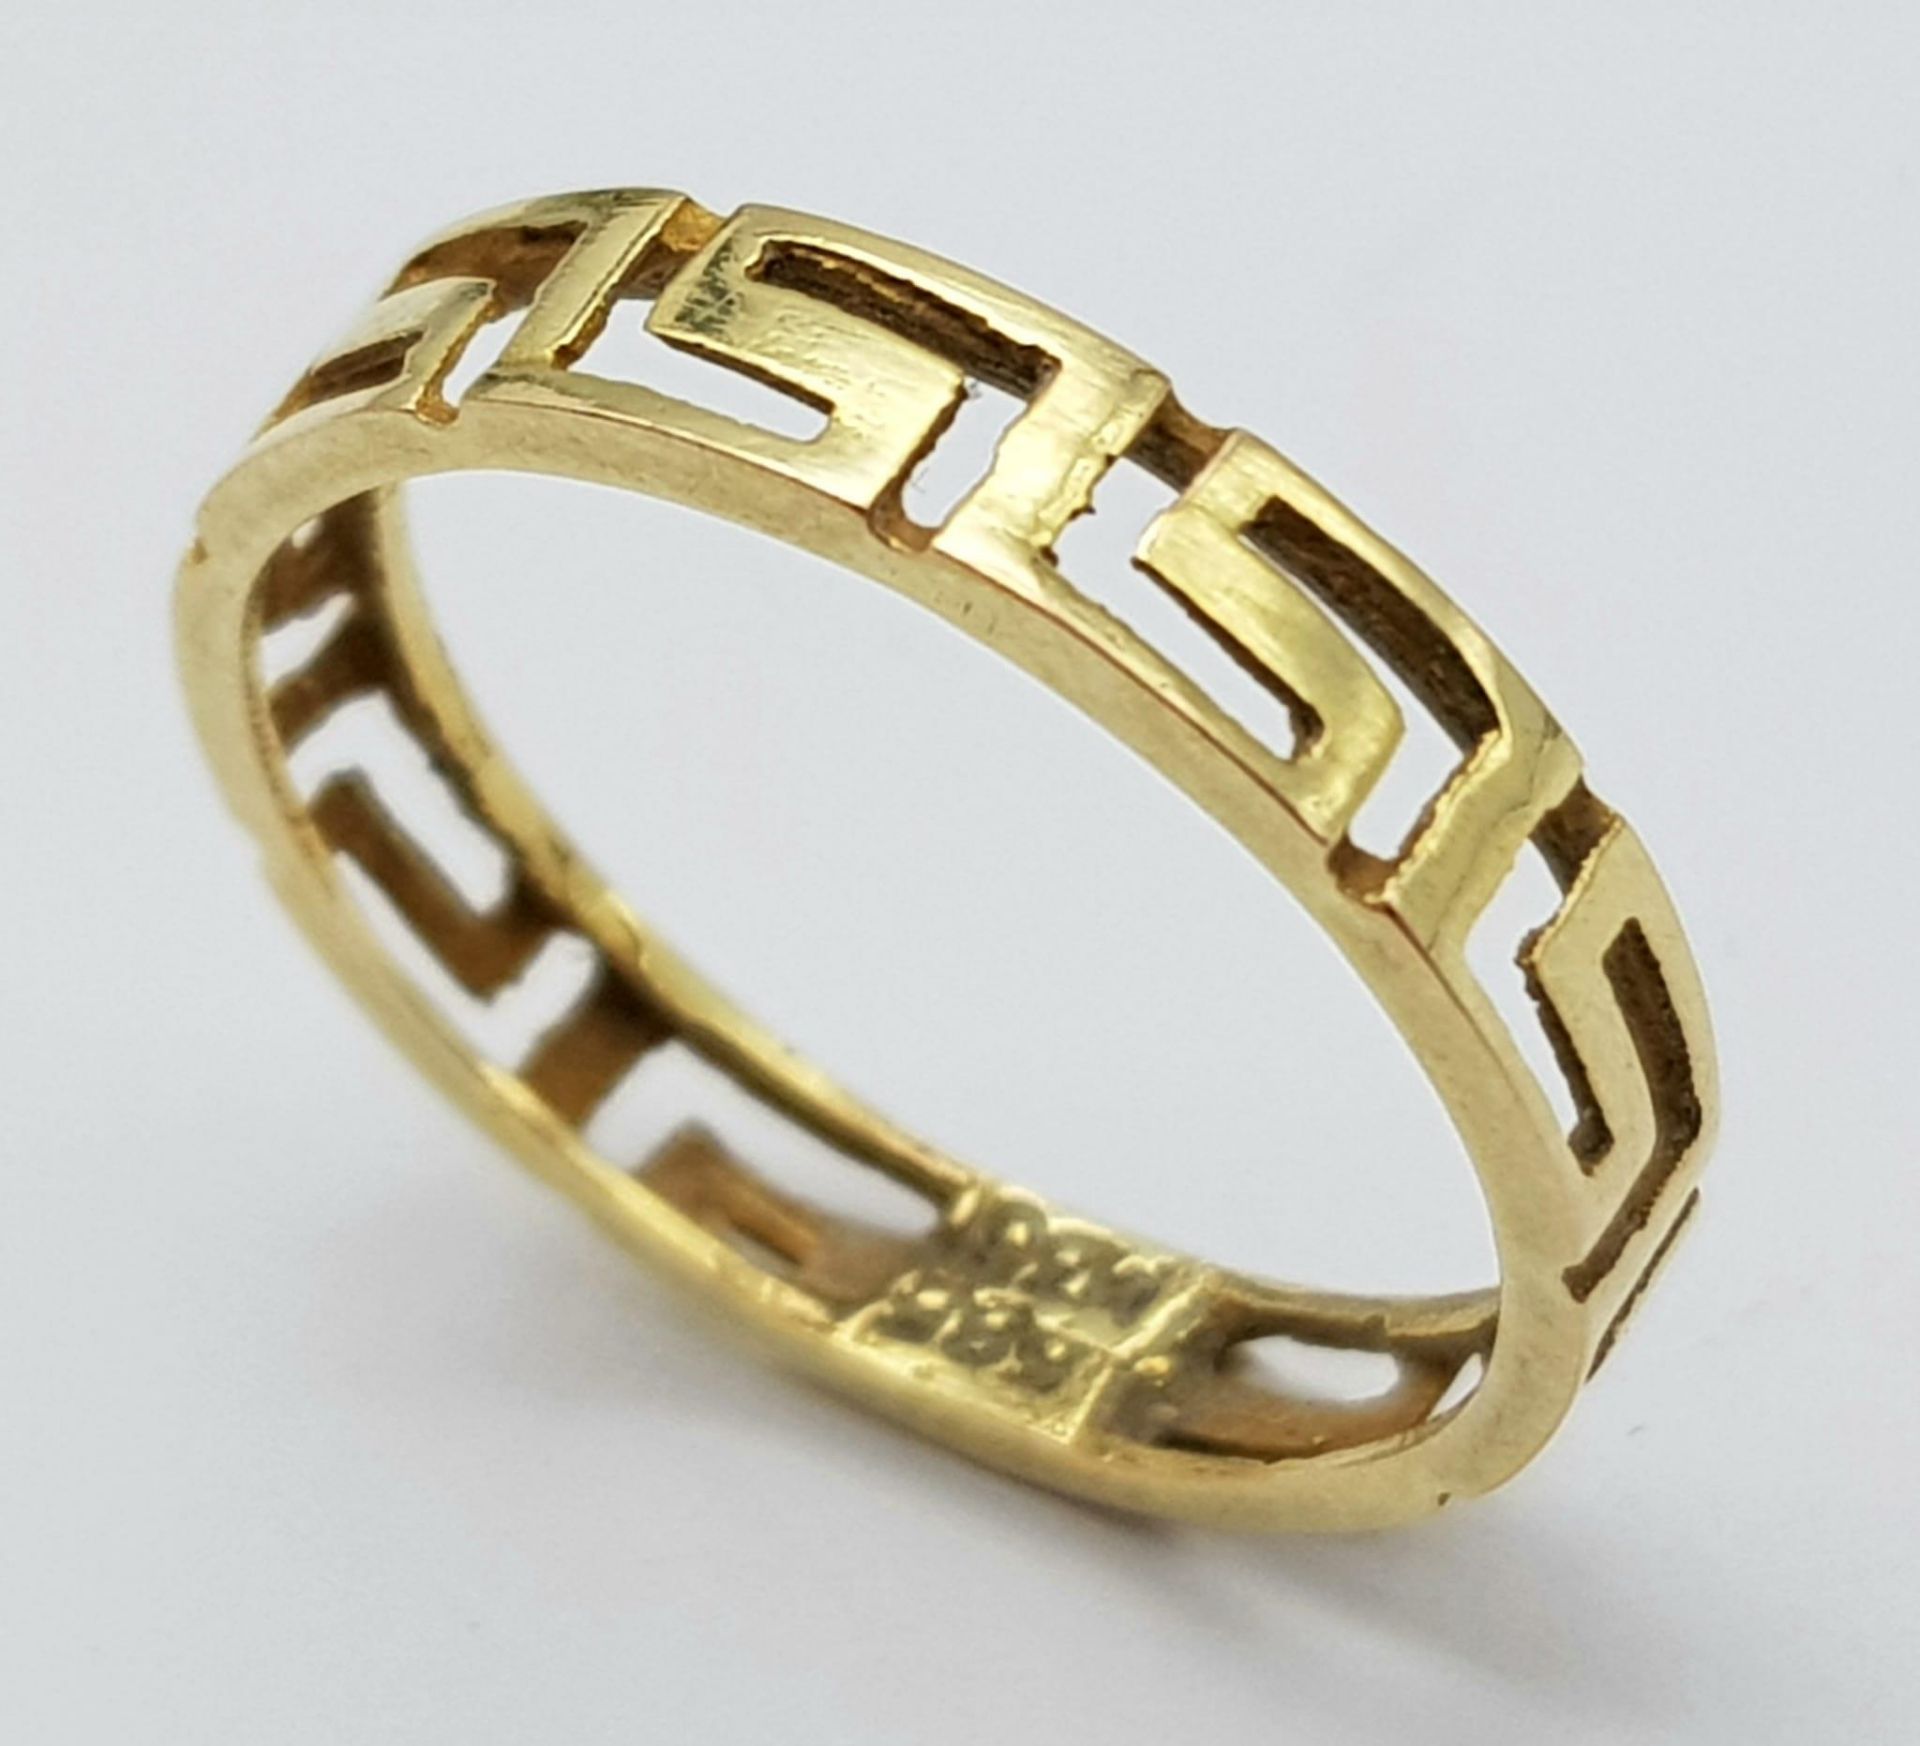 A nice 9 K yellow gold band ring with the Greek key design all around it. Size: K, weight: 1 g.